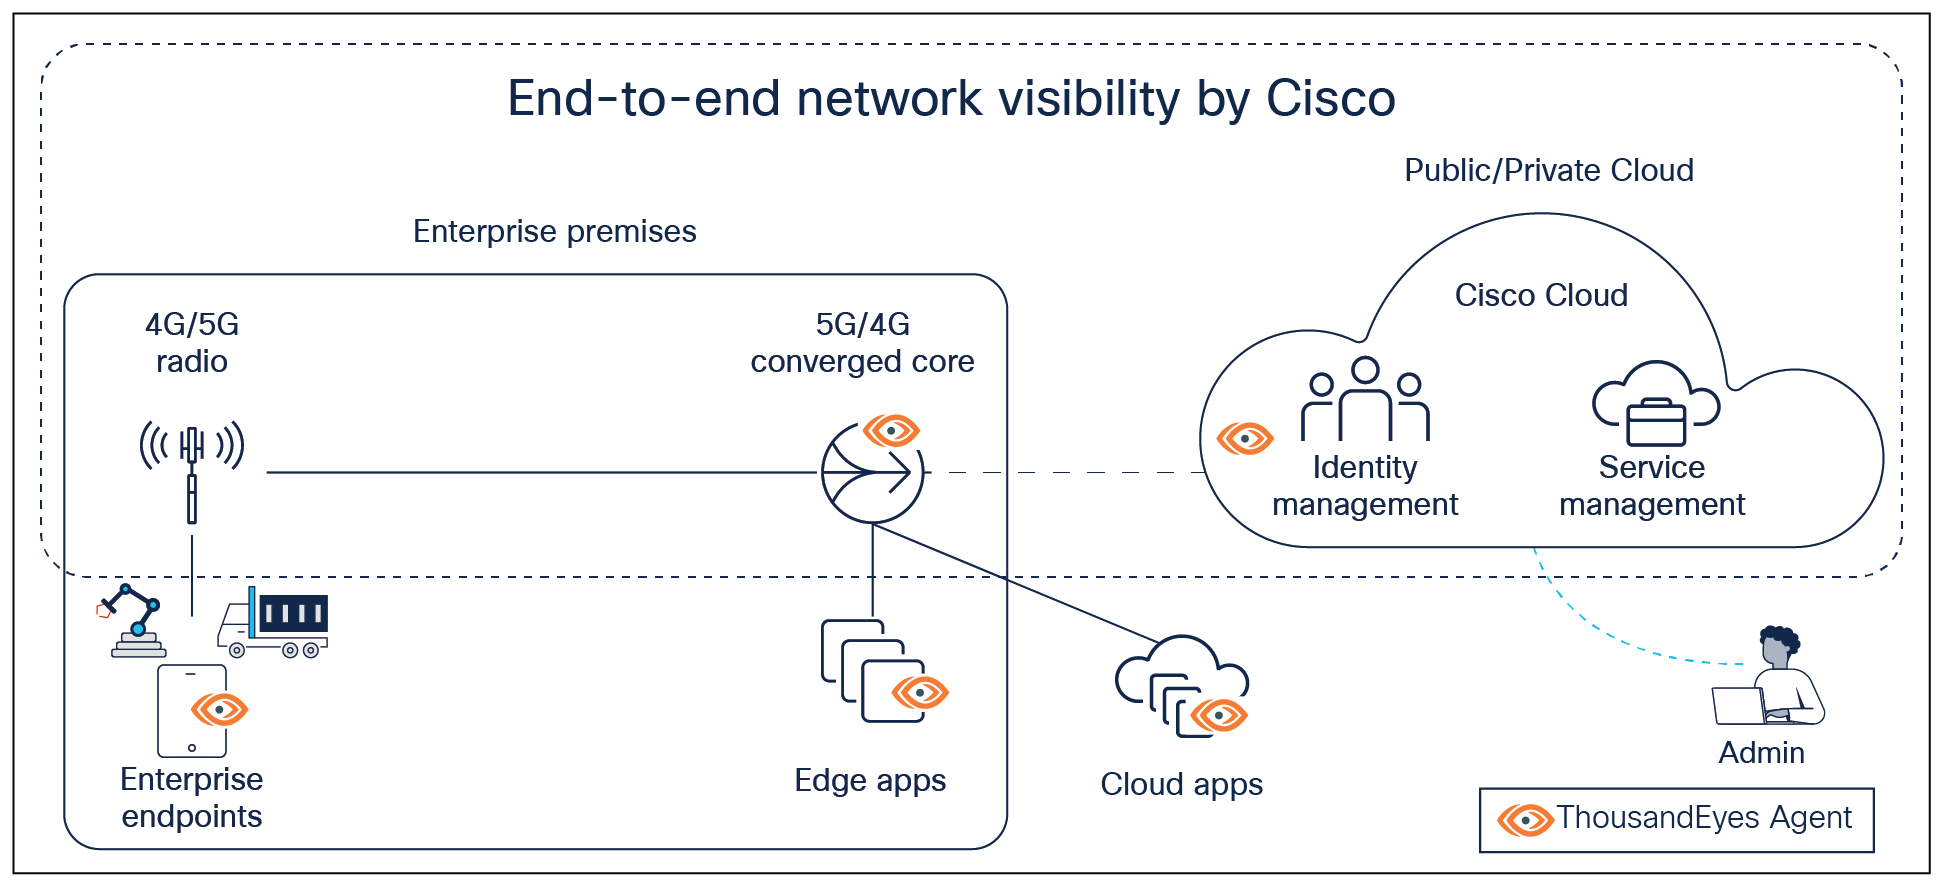 Integration of Cisco ThousandEyes with Cisco’s Private 5G solution